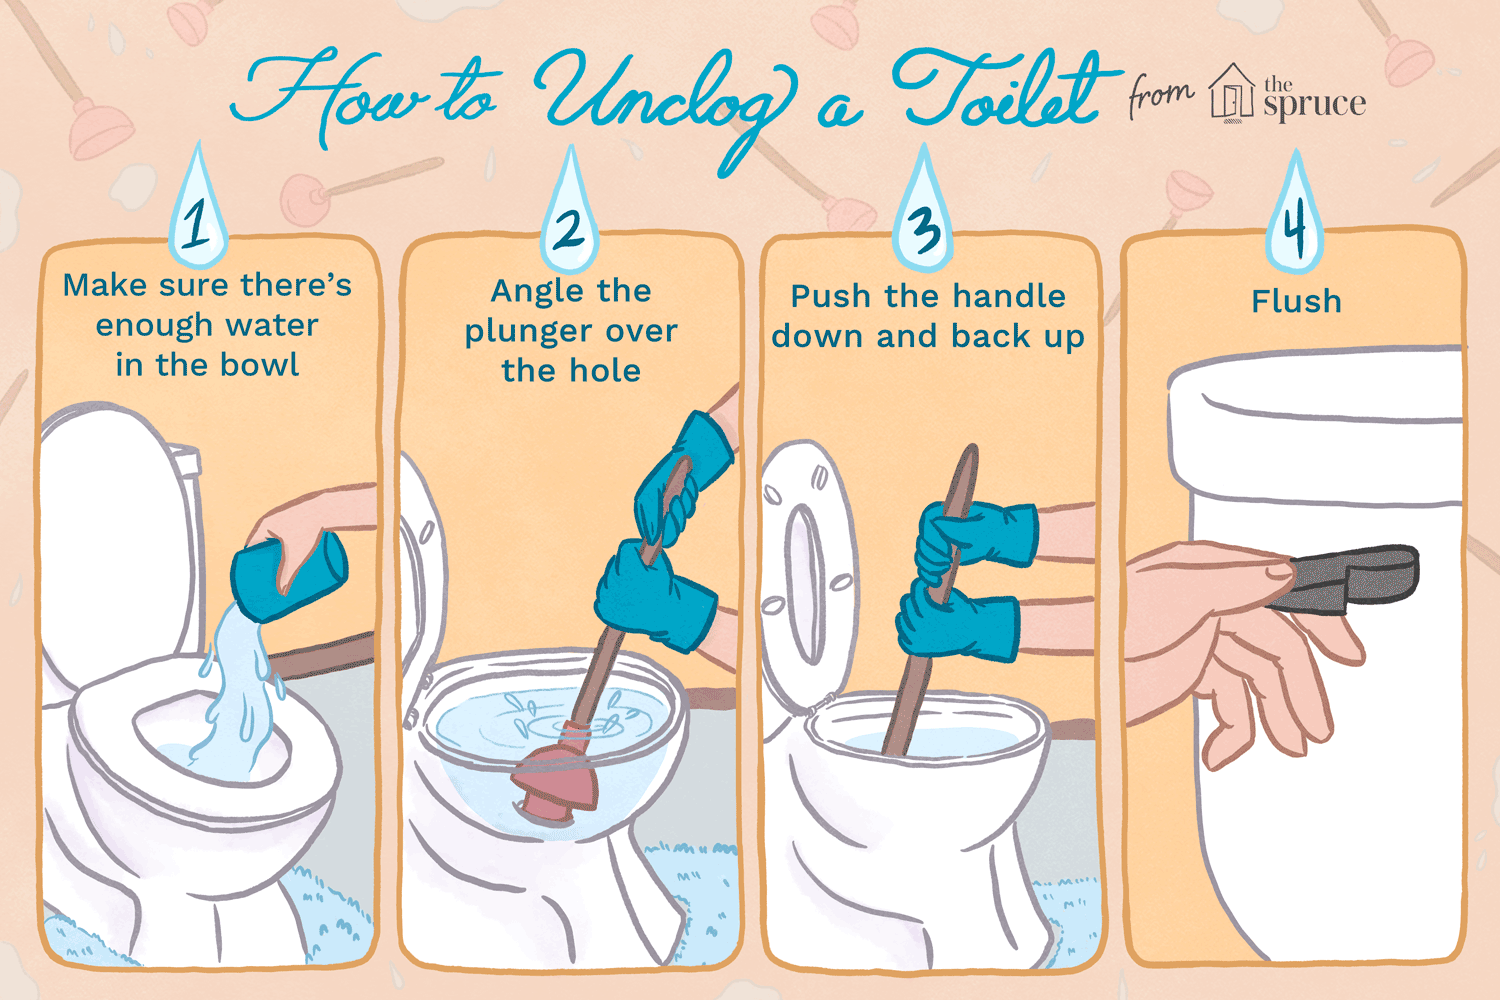 The Easiest Way to Unclog a Toilet